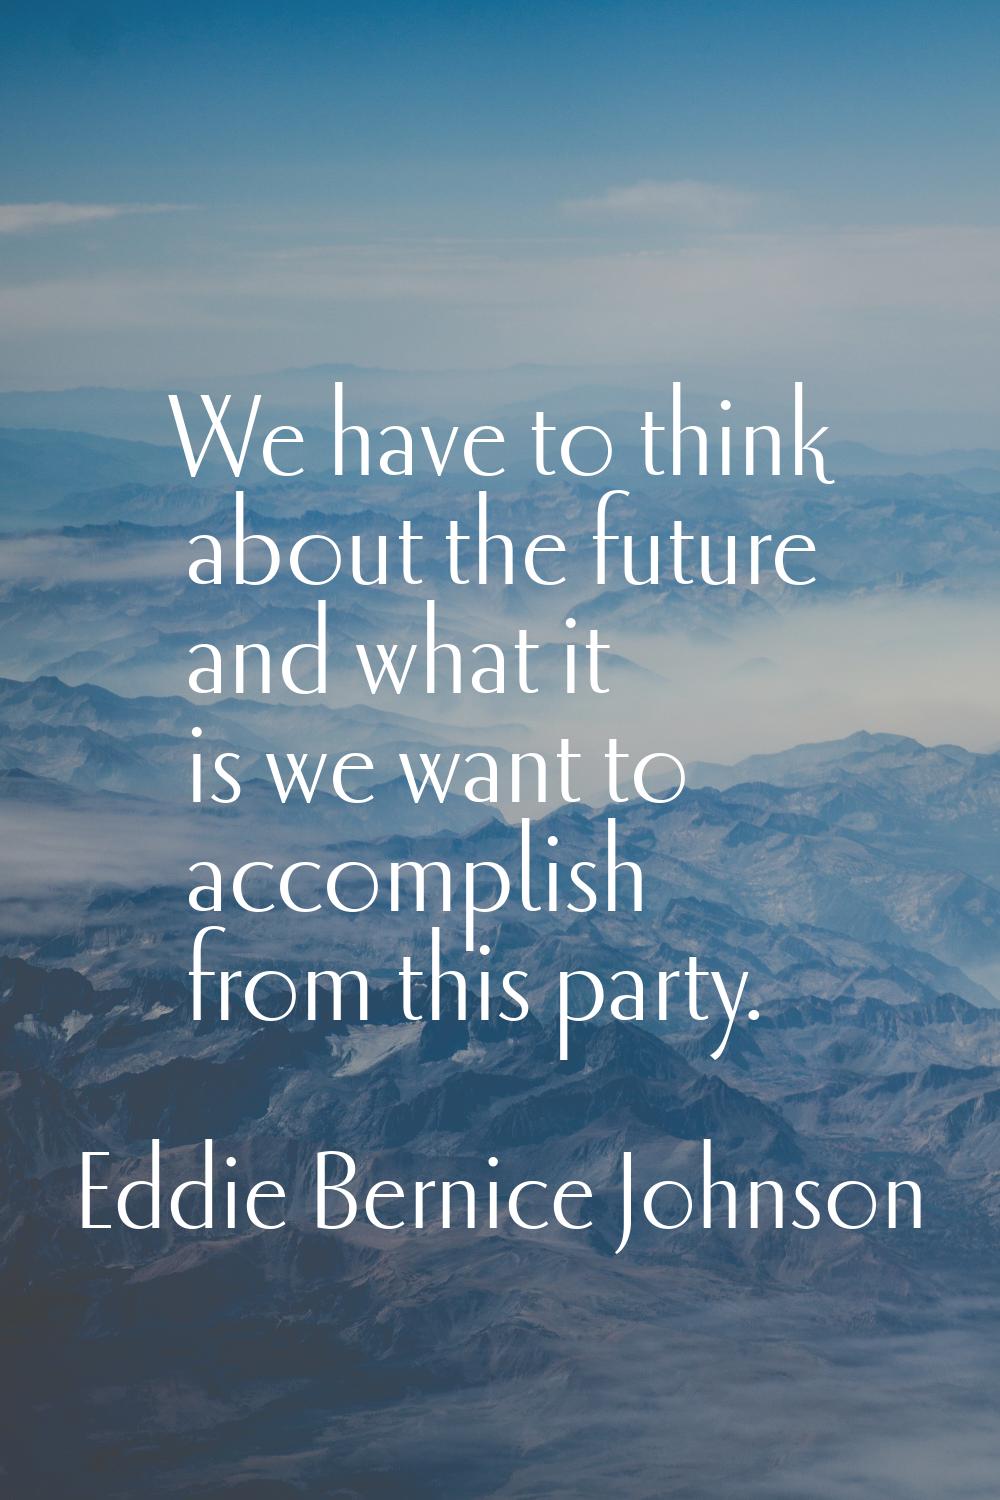 We have to think about the future and what it is we want to accomplish from this party.